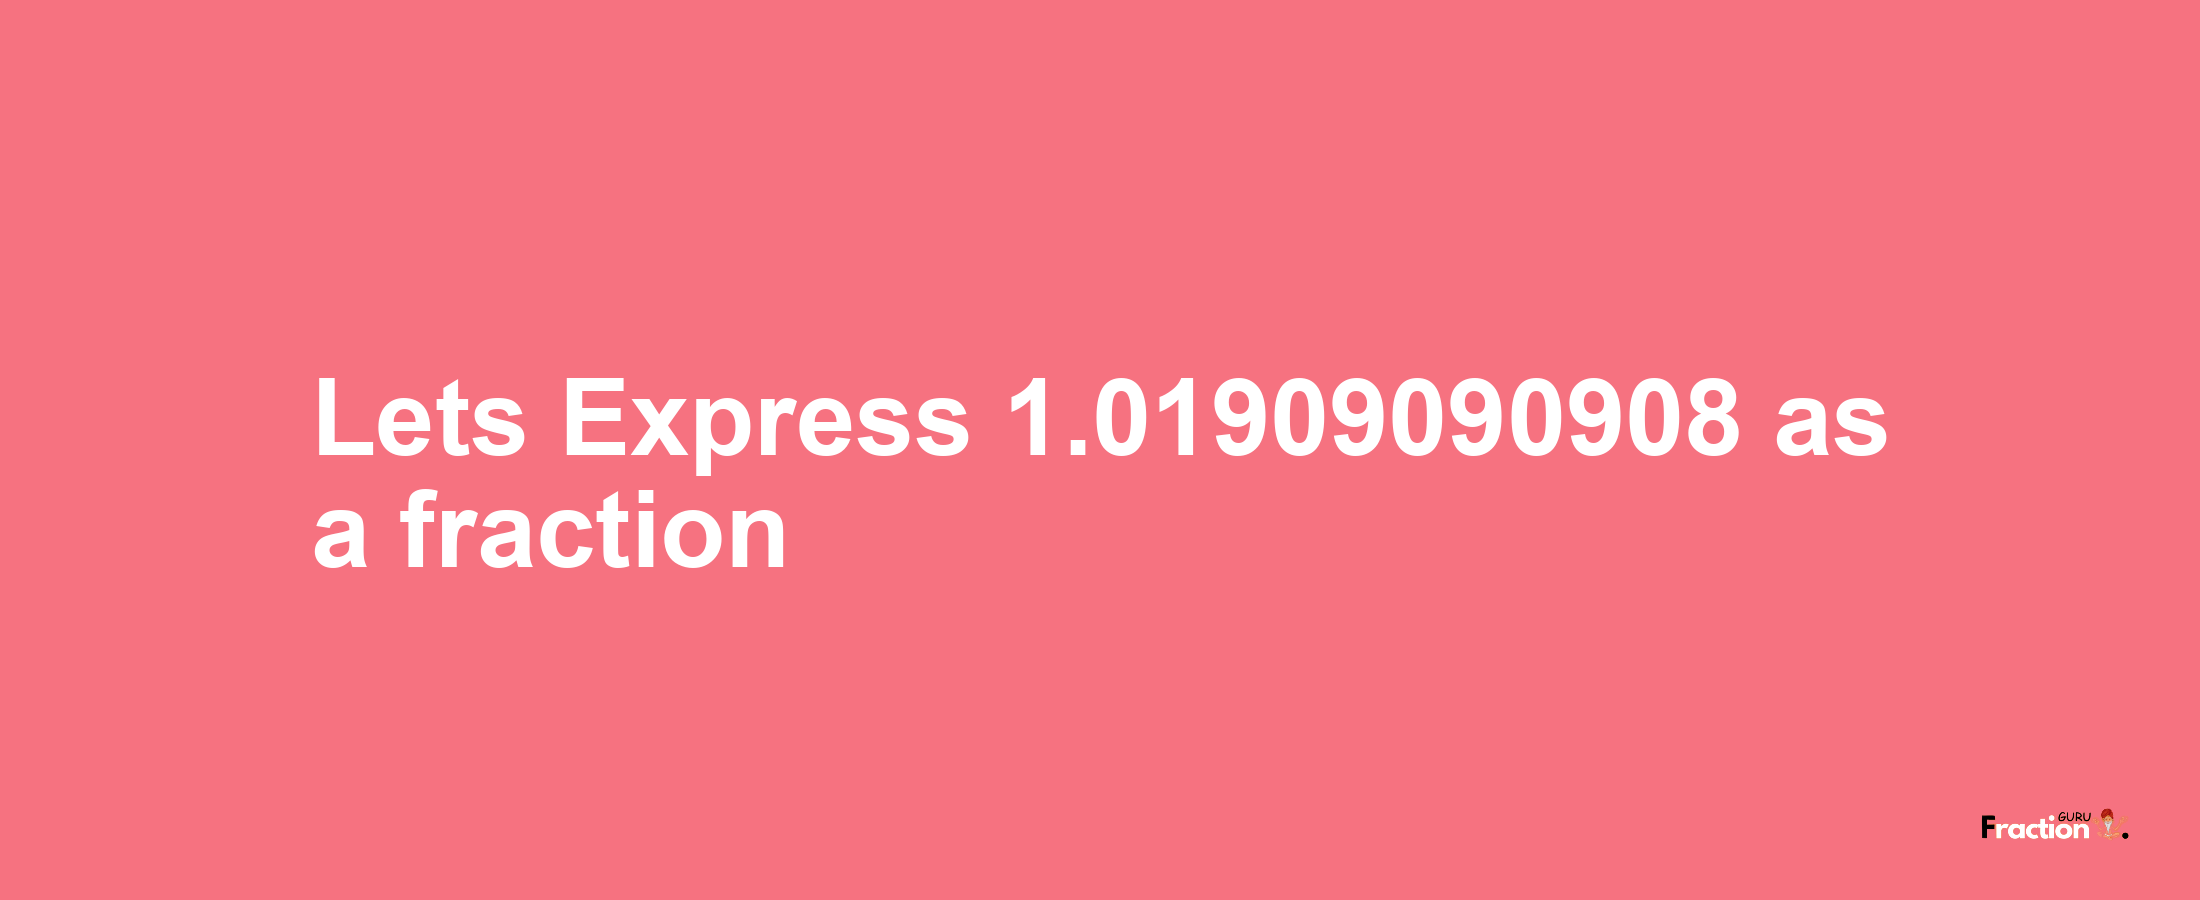 Lets Express 1.01909090908 as afraction